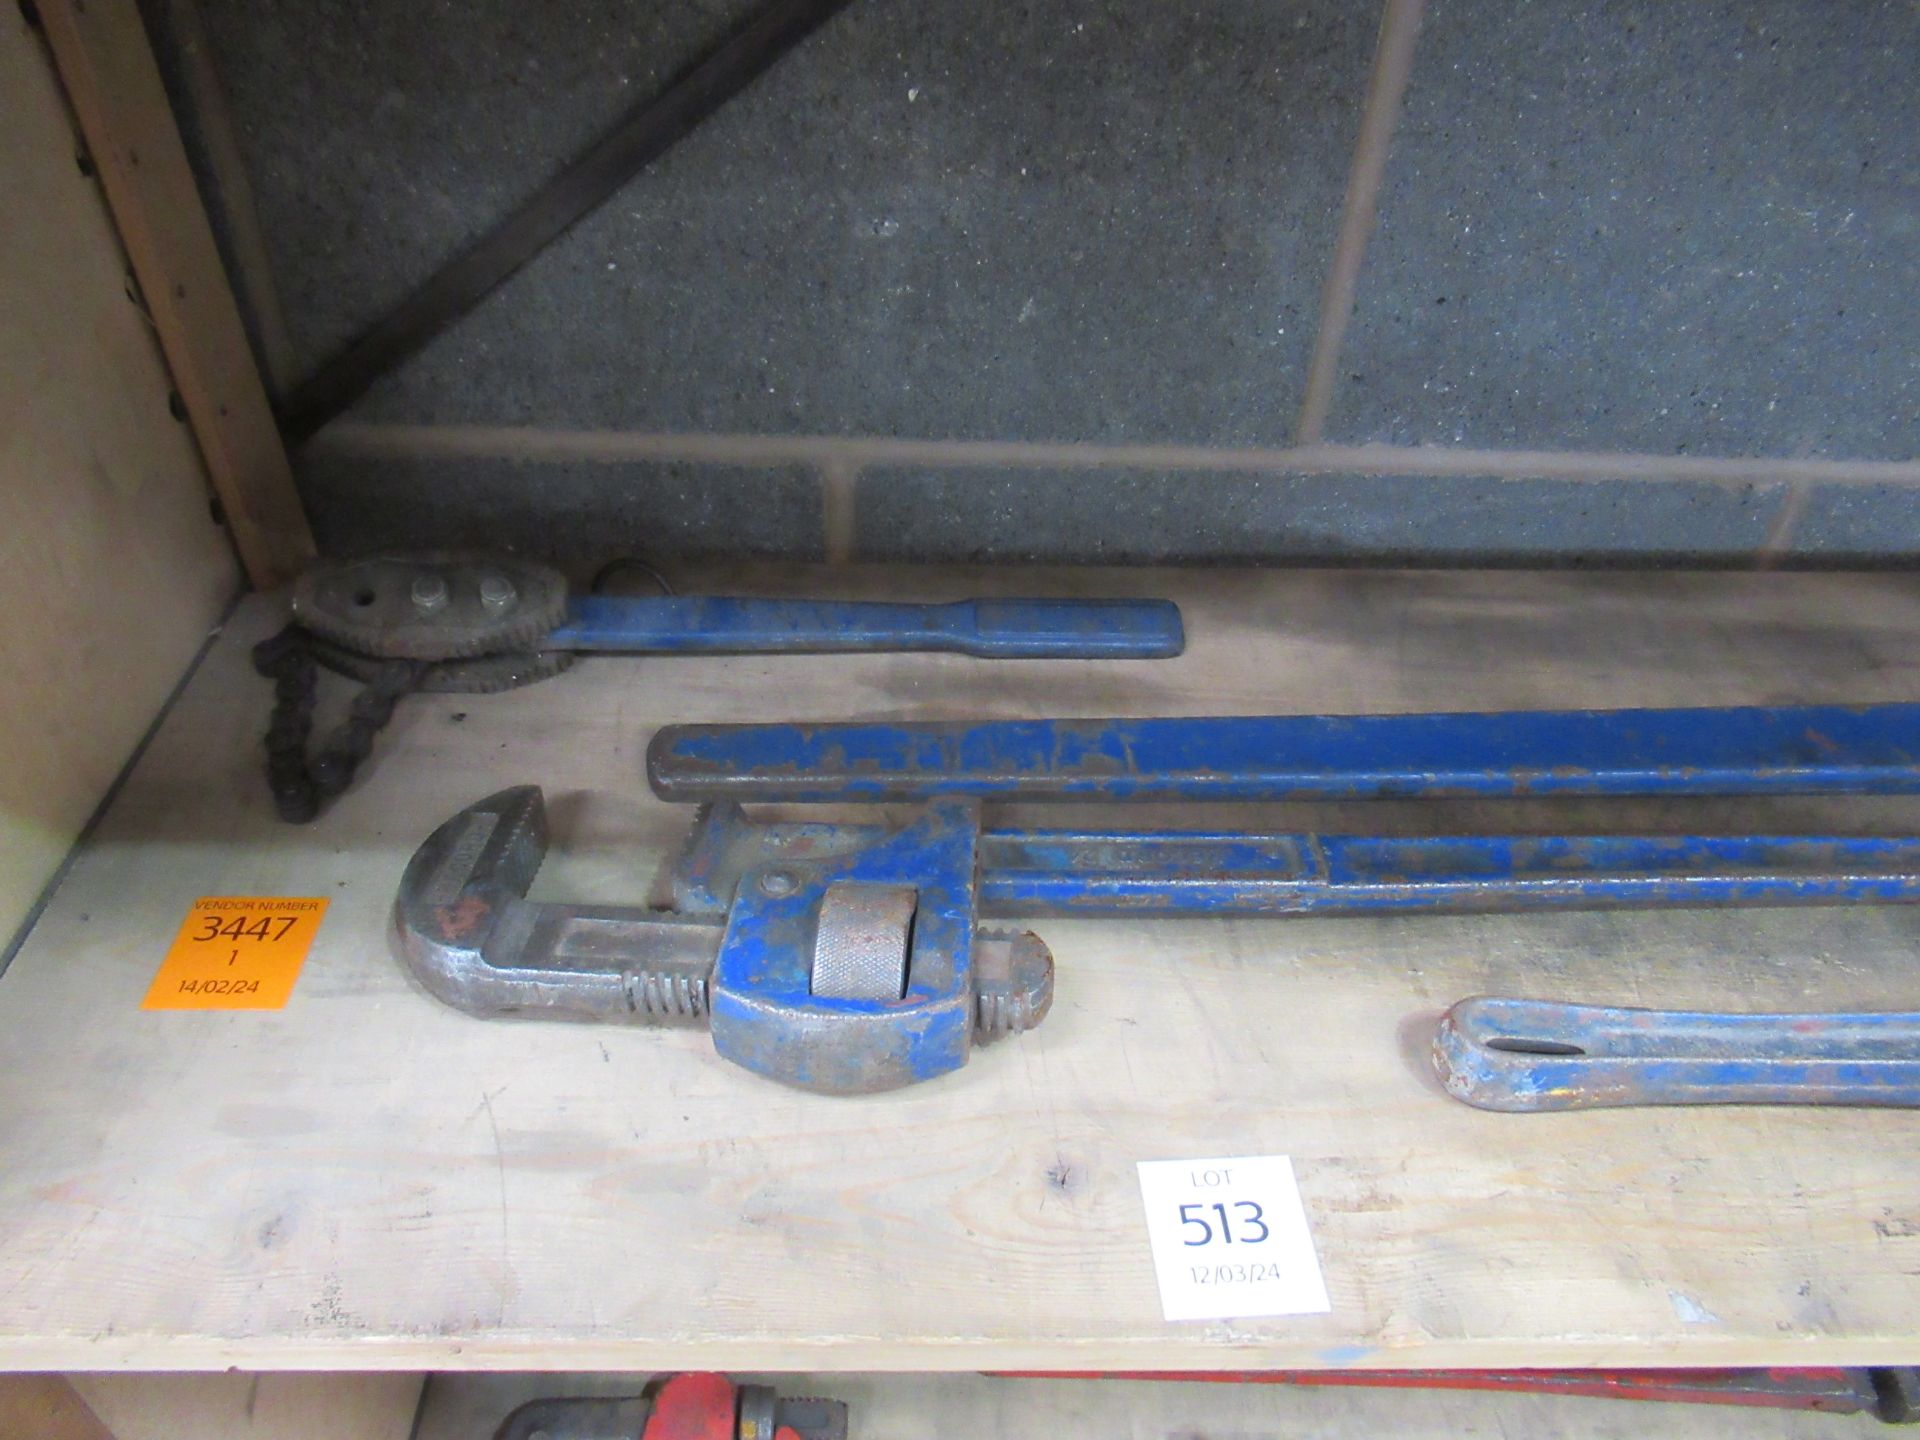 3x Various Pipe Wrenches/Stillsons and Chain Wrench - Image 3 of 3